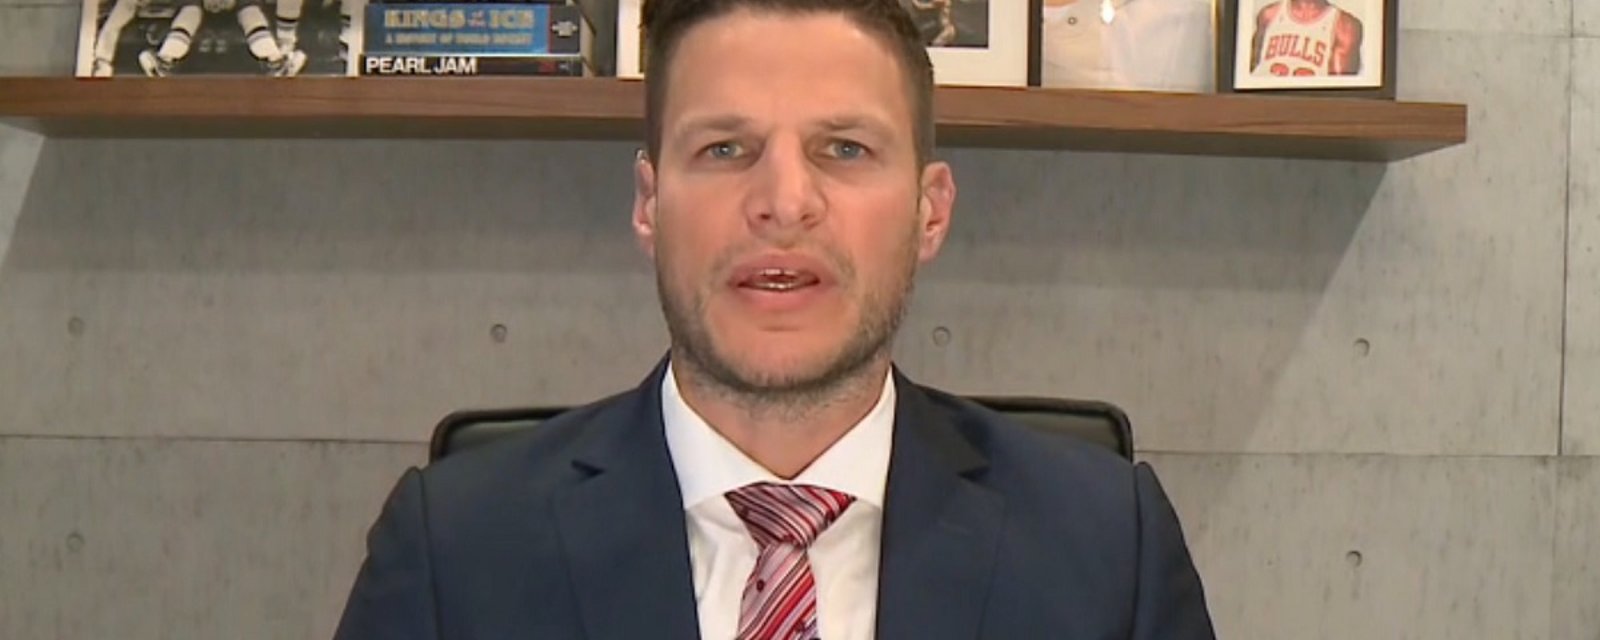 Kevin Bieksa steps up his game for his latest troll on HNIC.